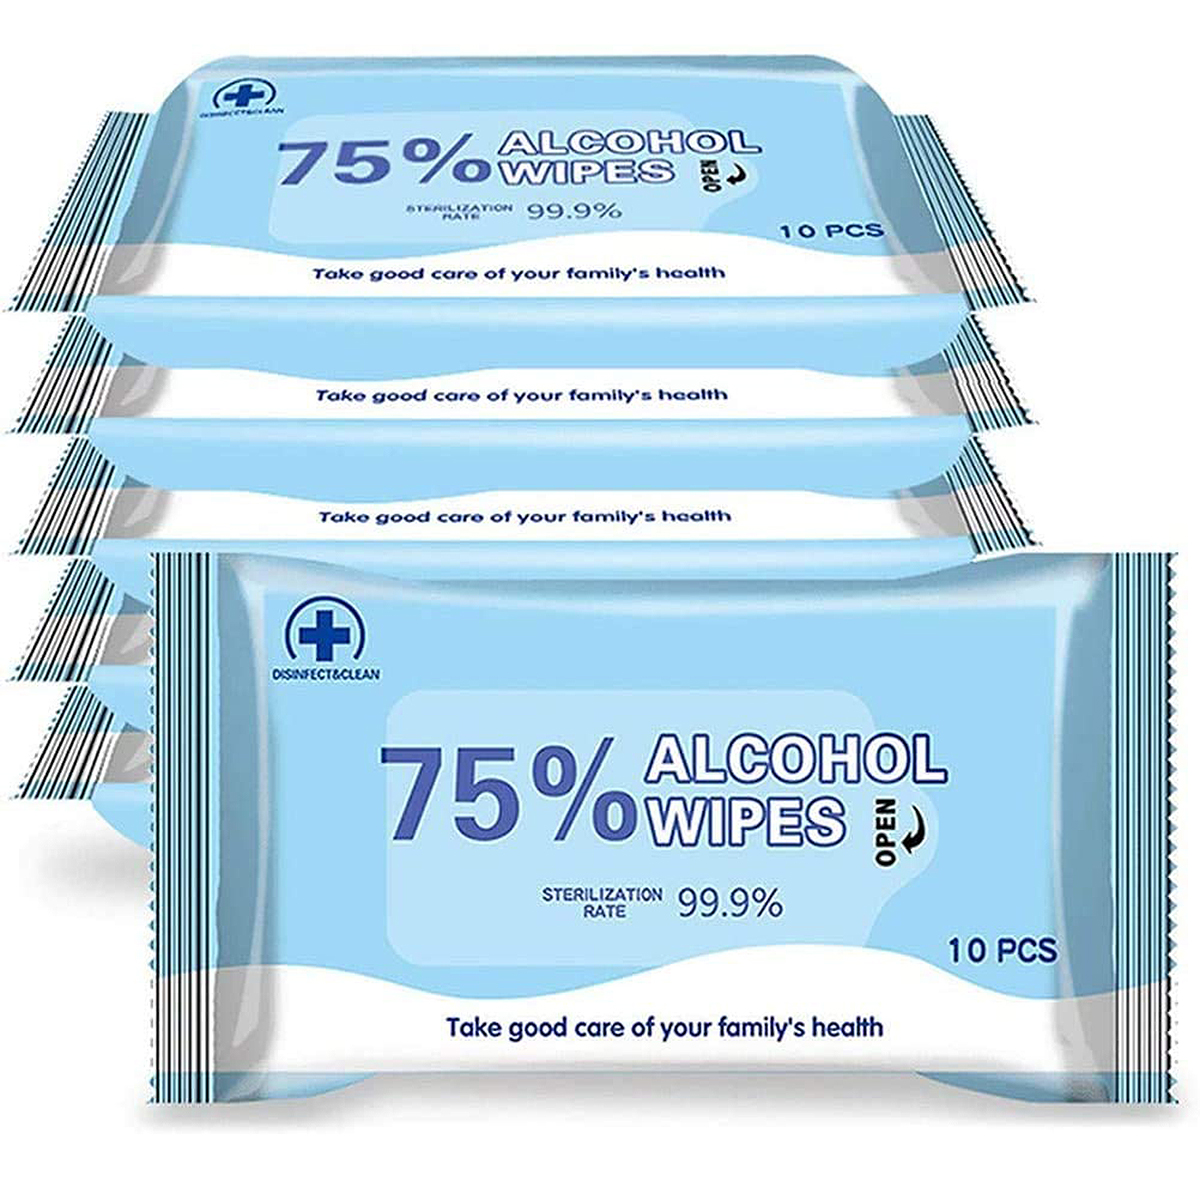 Disinfectant Wipes With 75% Alcohol Are in Stock at Amazon